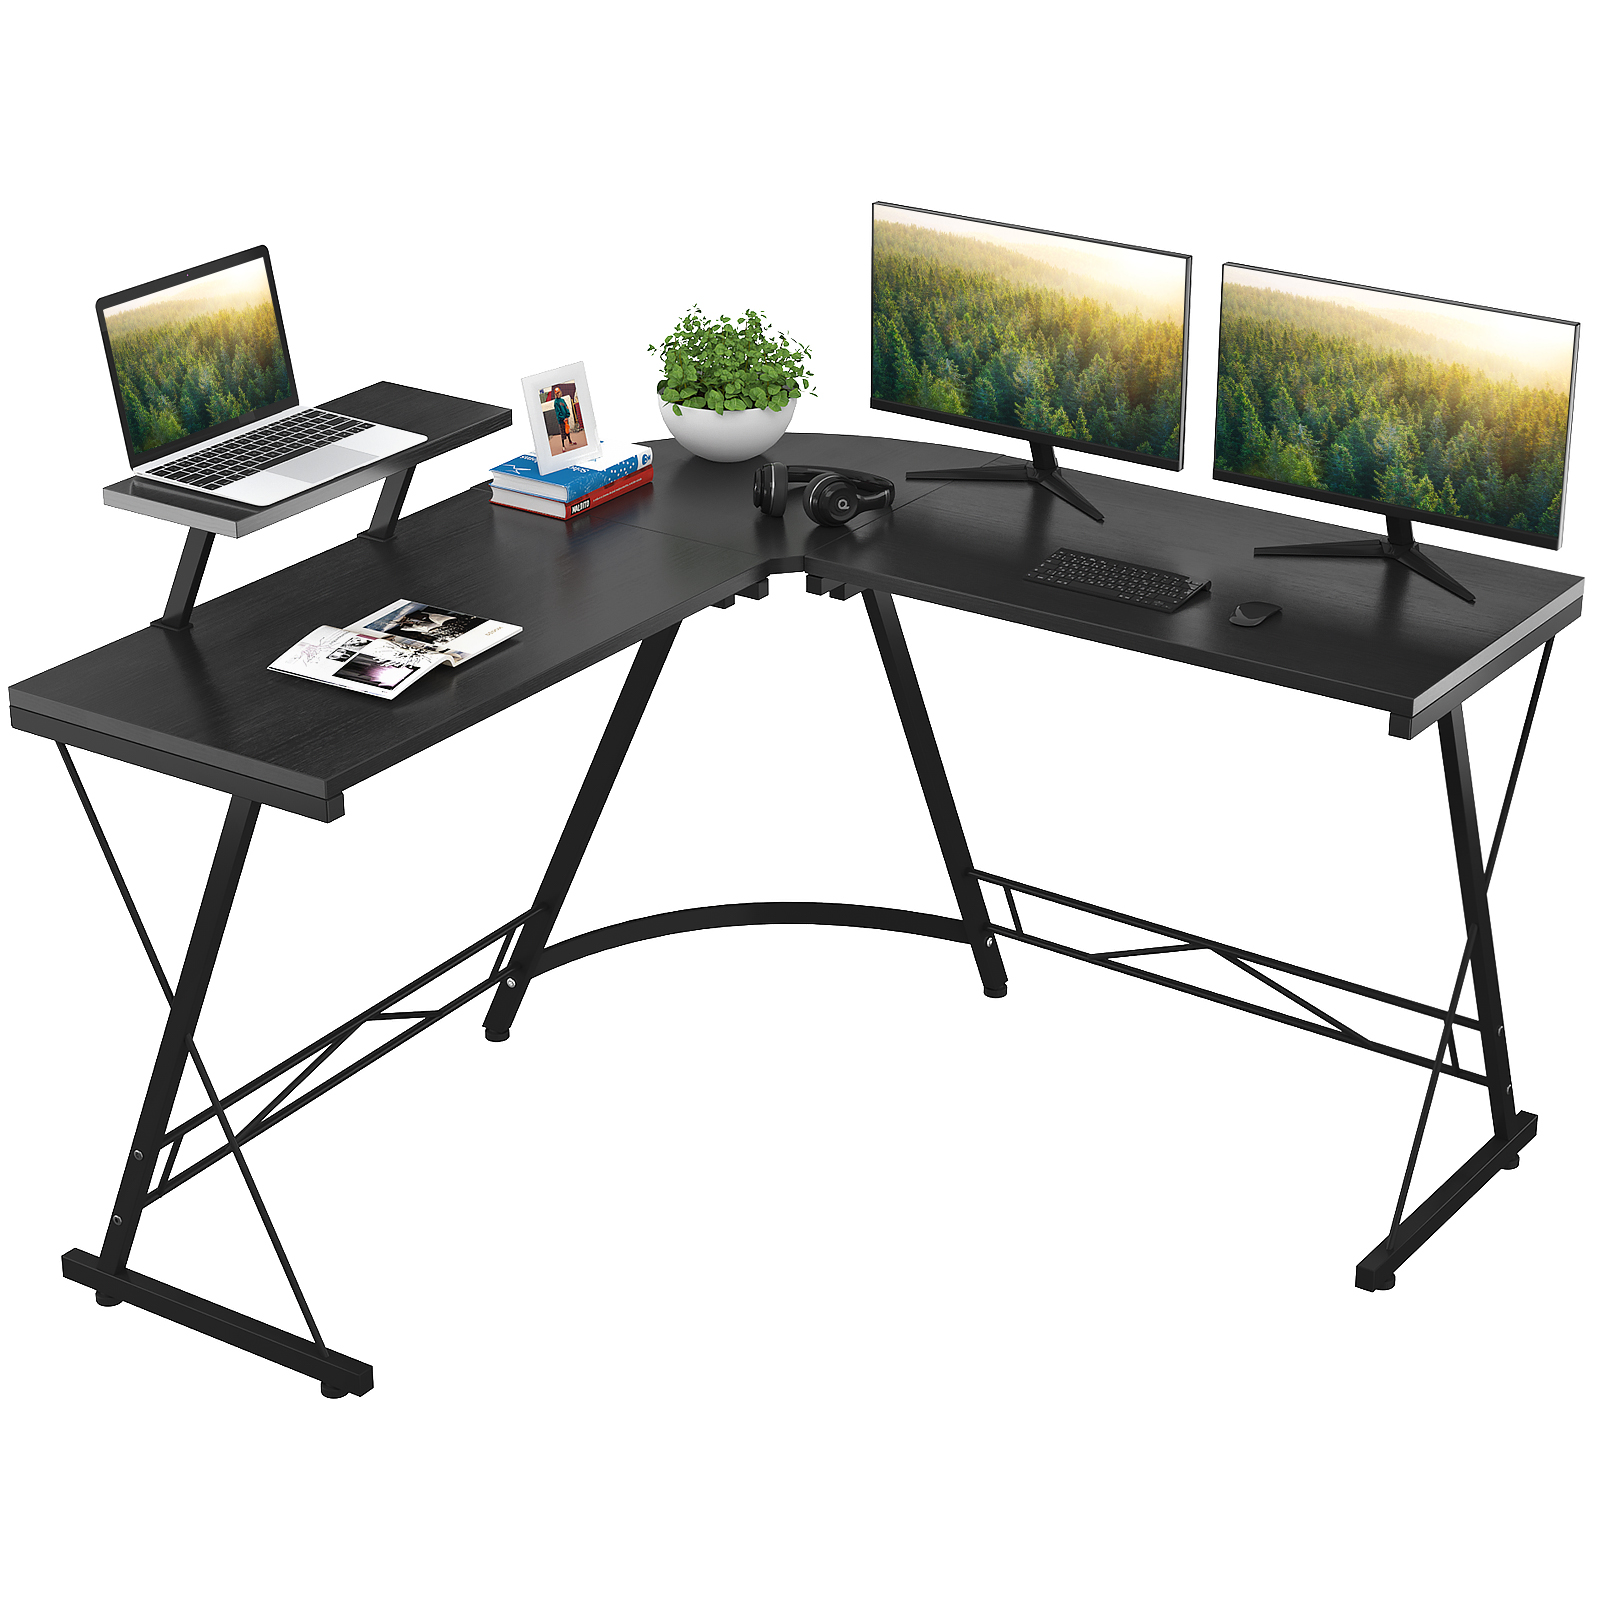 L Shaped Desk Home Office With, Large Round Computer Table